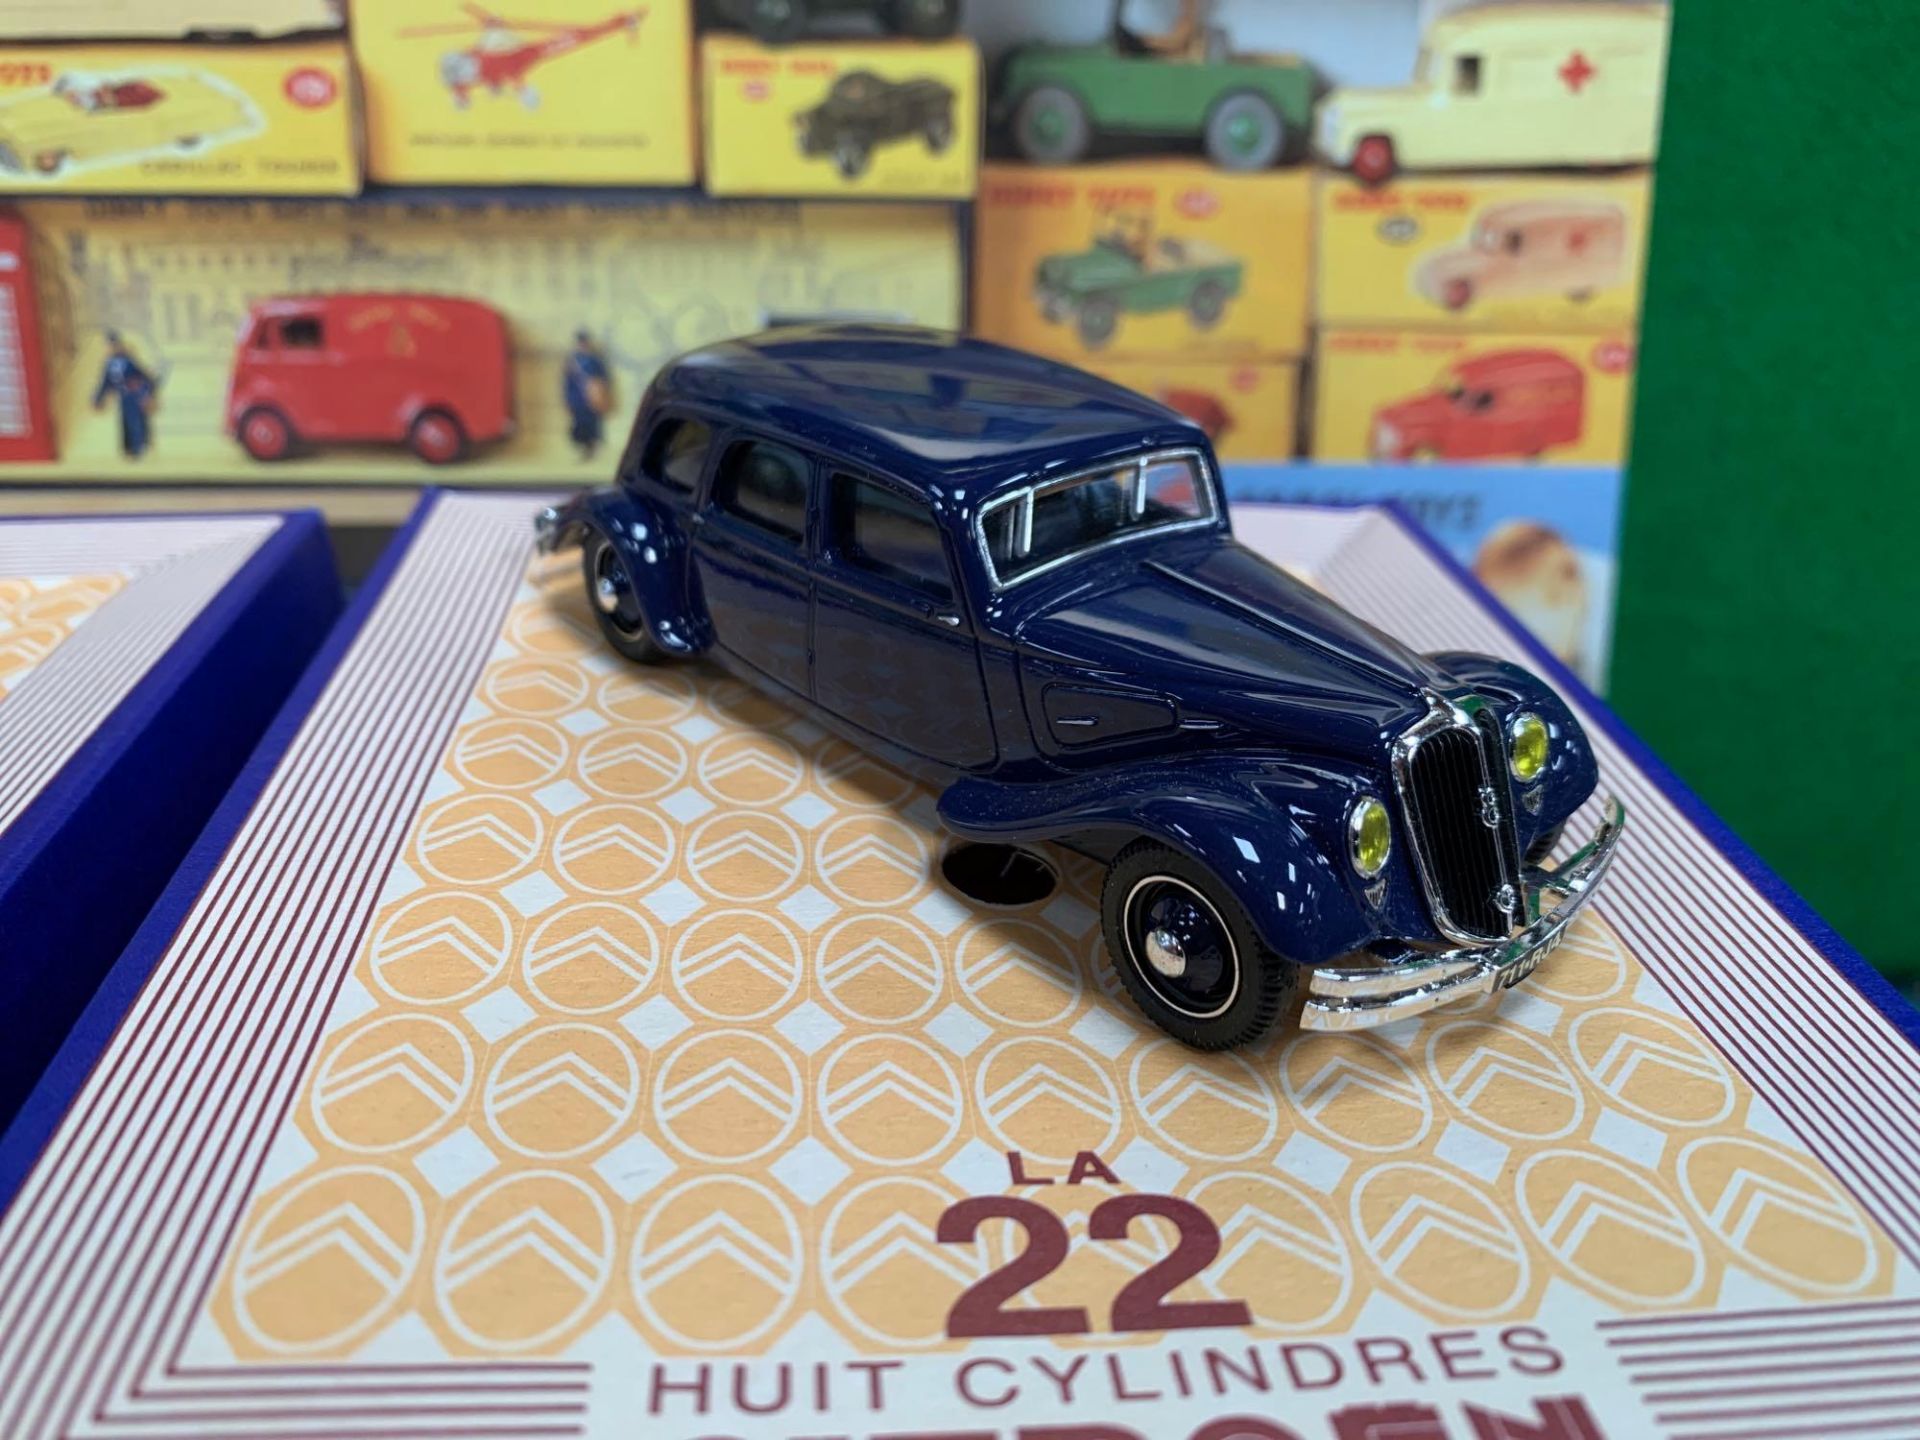 2 X Norev Diecasts. Citroen - Traction Avant 22CV Familiare 1934 Limousine In Navy Blue And - Image 4 of 9